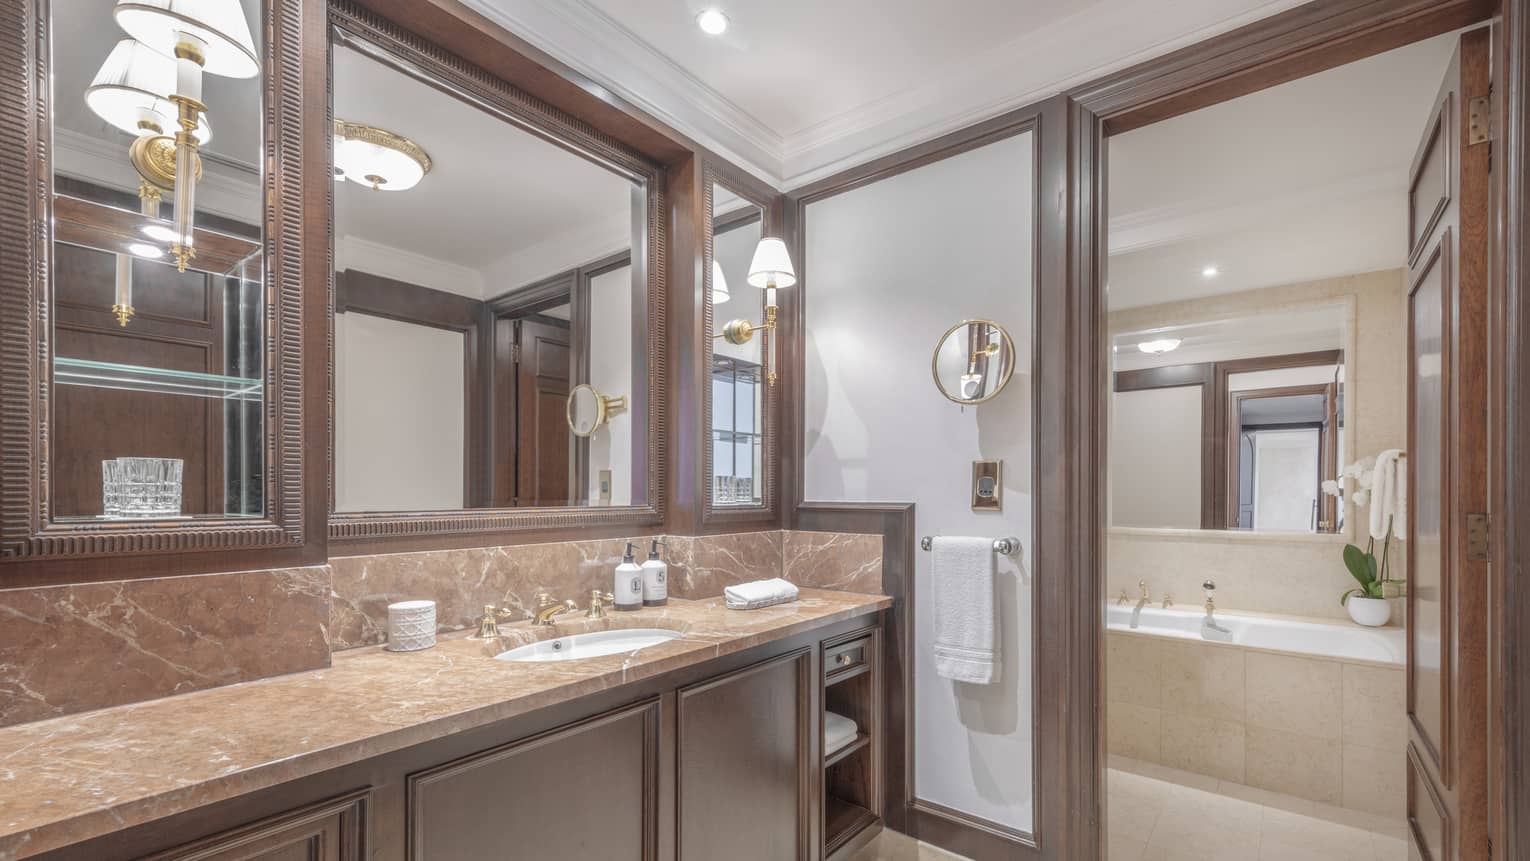 A large bathroom with a large countertop, sink, large mirror and a separate room with a bath.